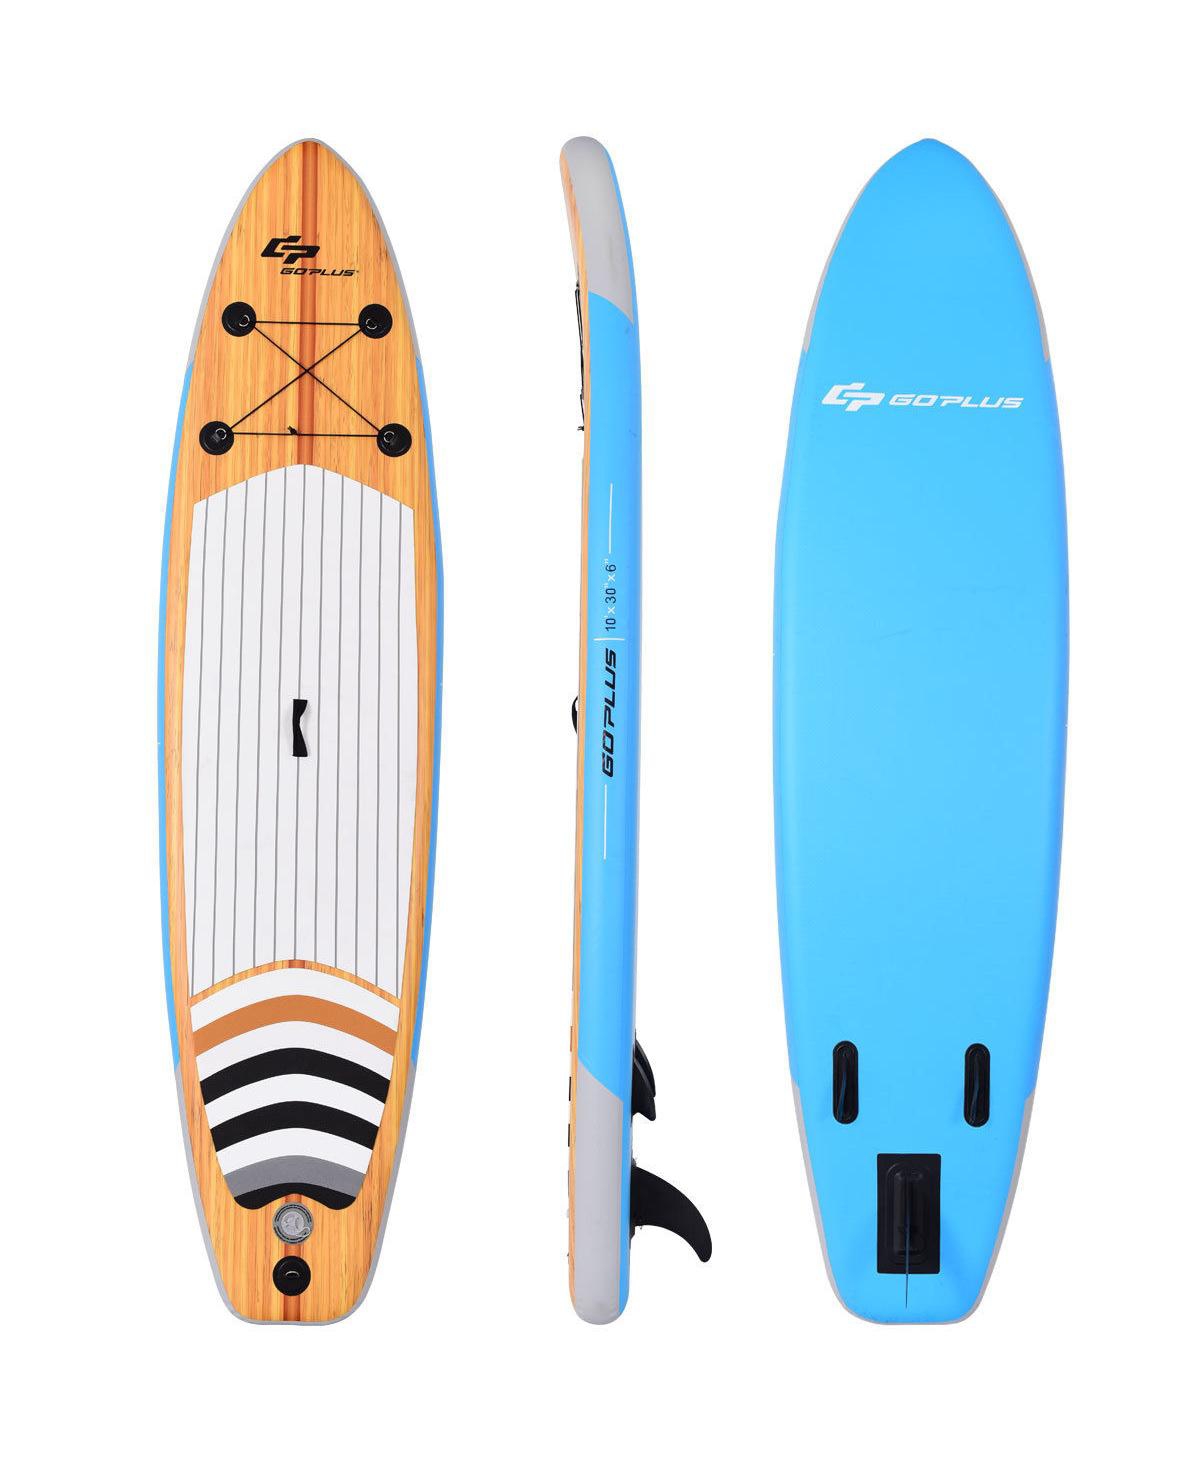 1 pcs 10' Inflatable Stand up Paddle Board Surfboard Sup - Orange